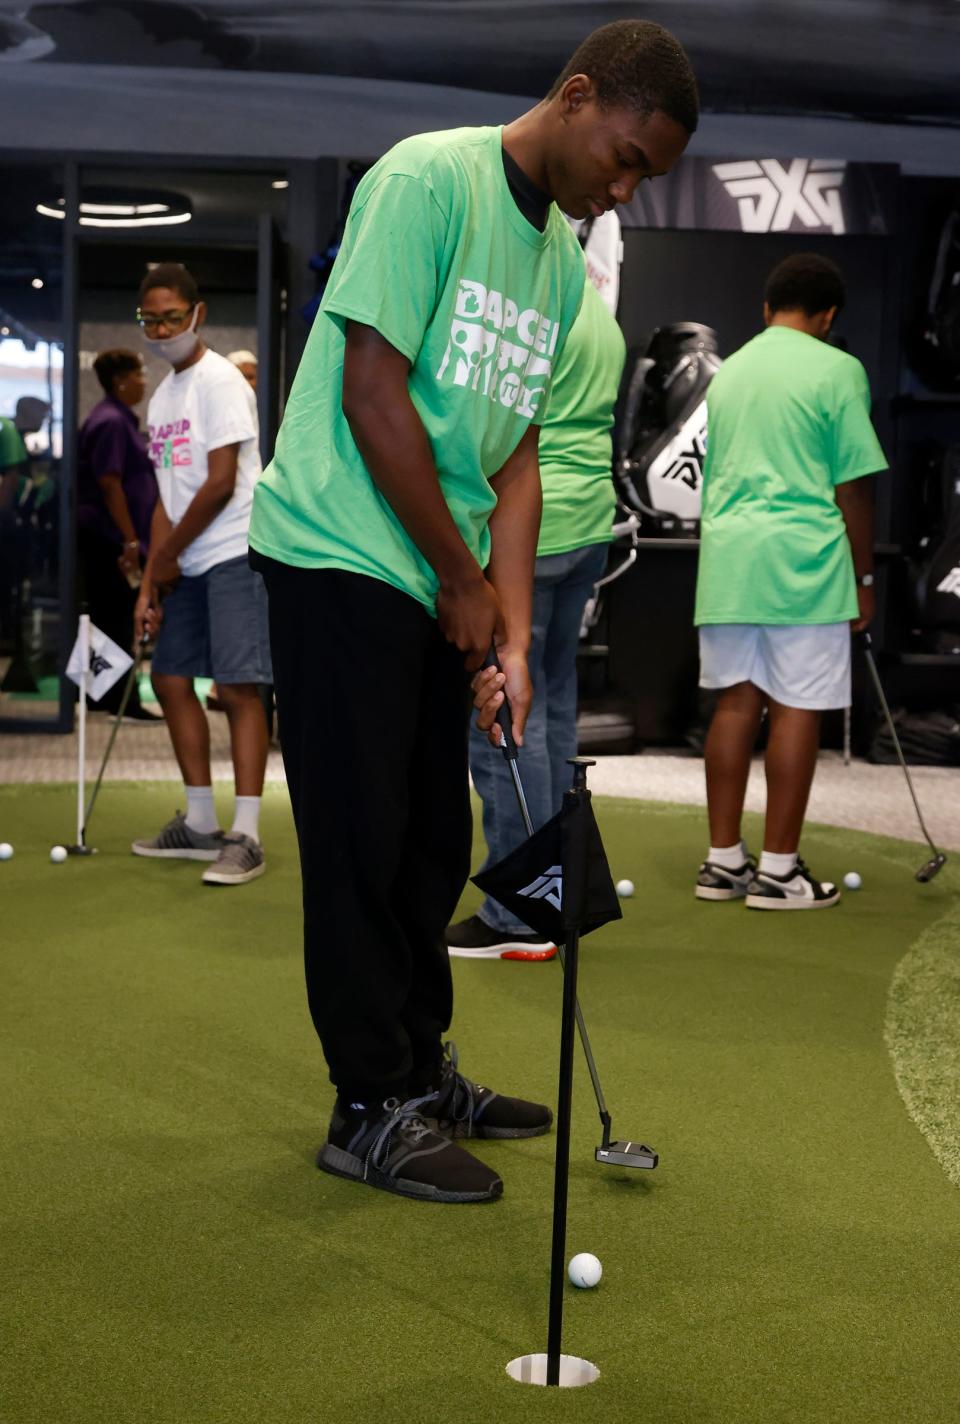 Doryian Kirkwood, 15, putts during the one-day DAPCEP camp at PXG (Parsons Extreme Golf) in Troy on July 27, 2022. Nineteen students from the metro Detroit school learned the science and engineering of golf from the clubs to ball striking.